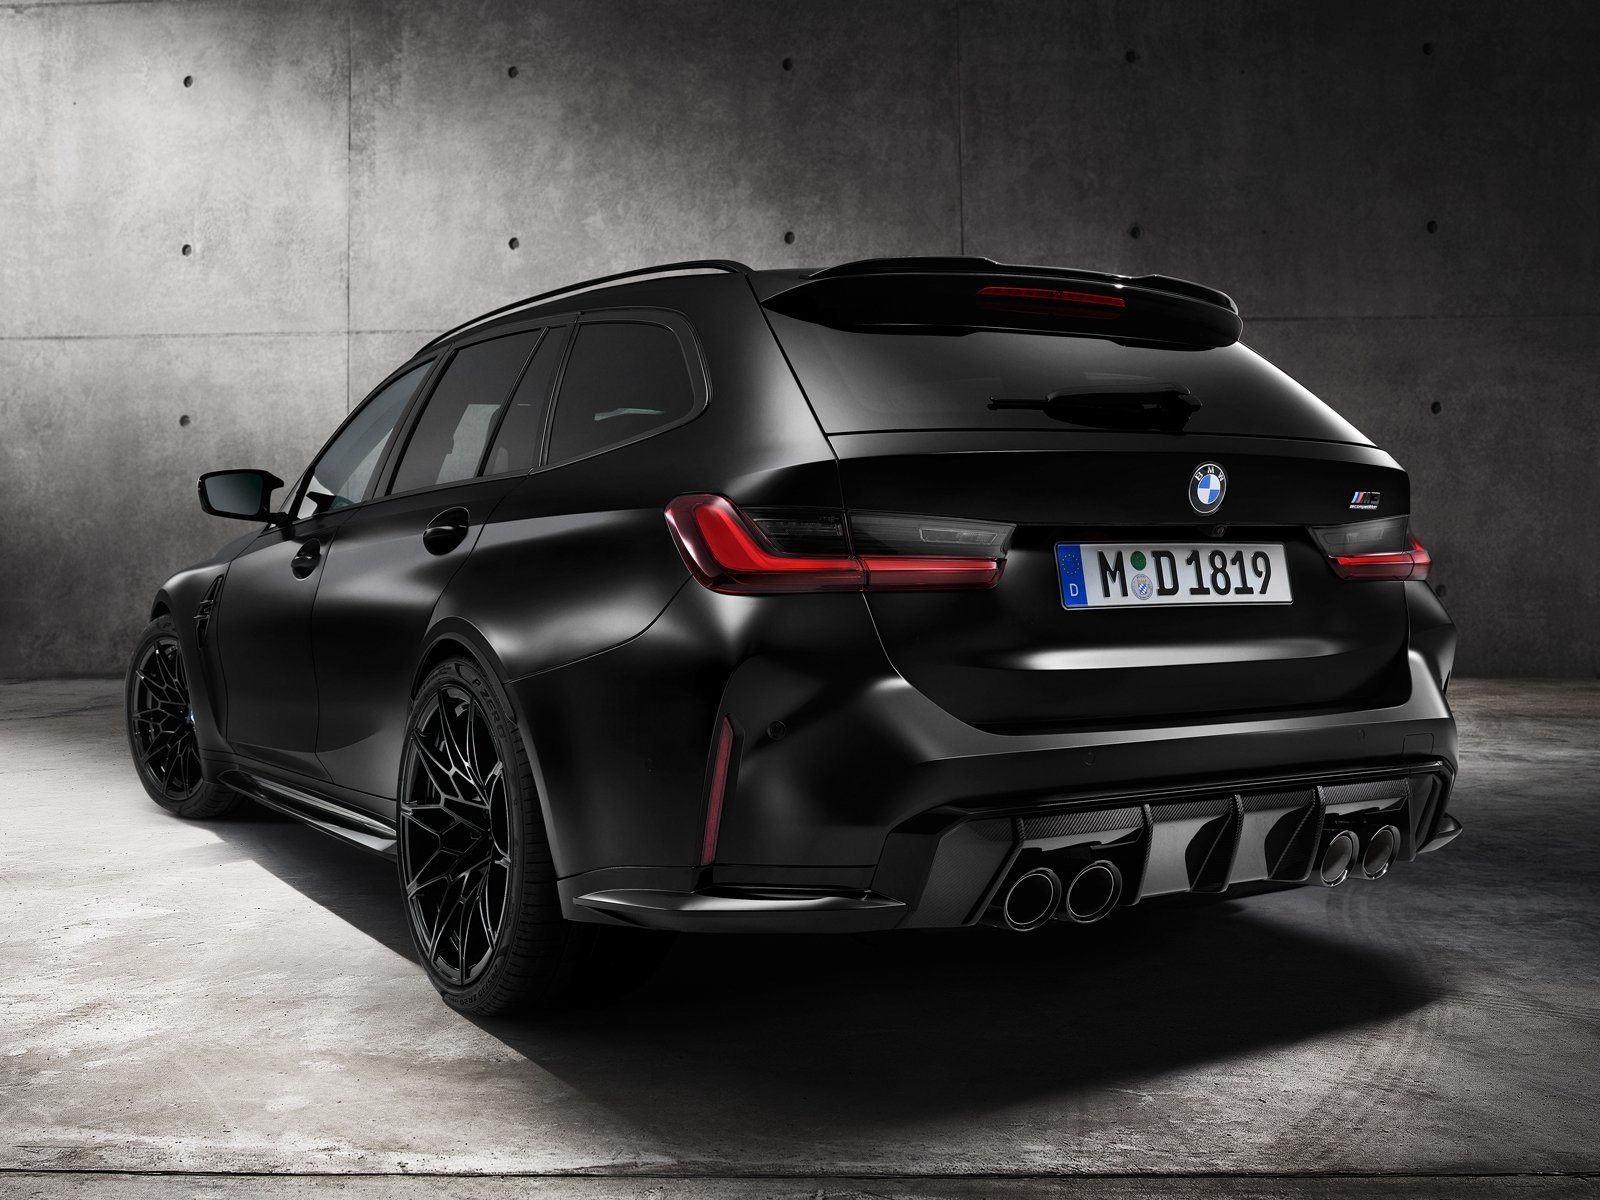 All-Black BMW M3 Touring With Matte Paint Poses For The Camera